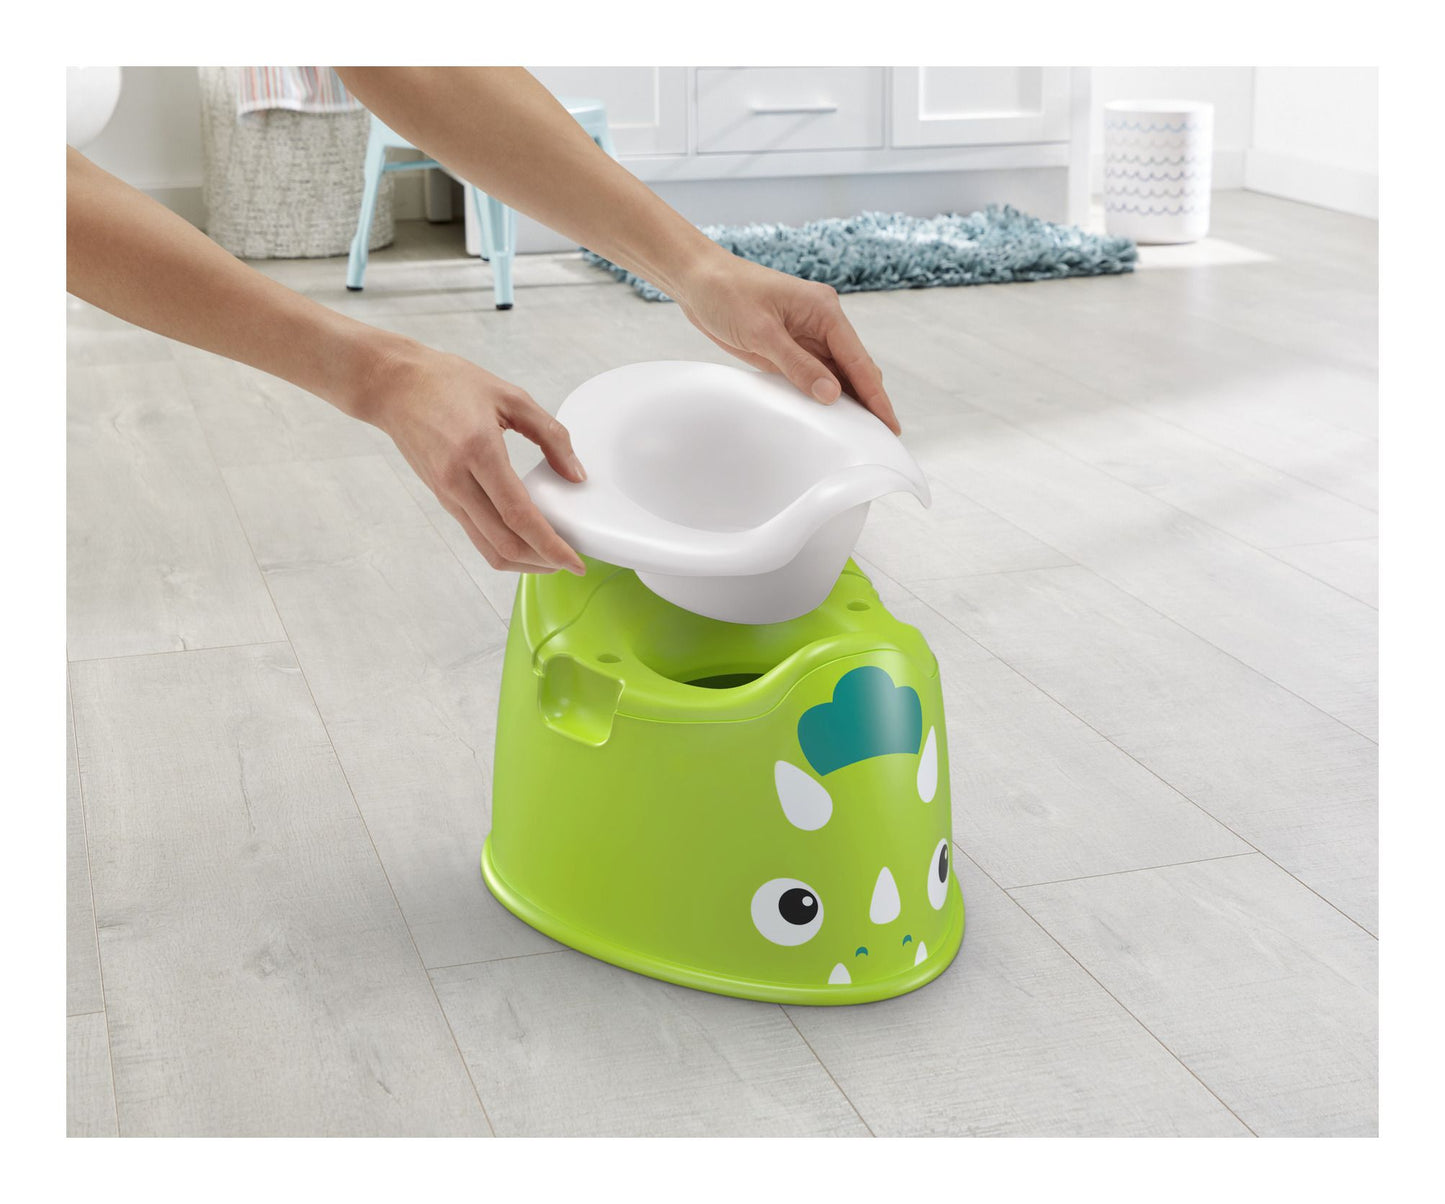 Toilet Learning - Potty Training - Portable Loo with Removable Bowl & Splashgaurd